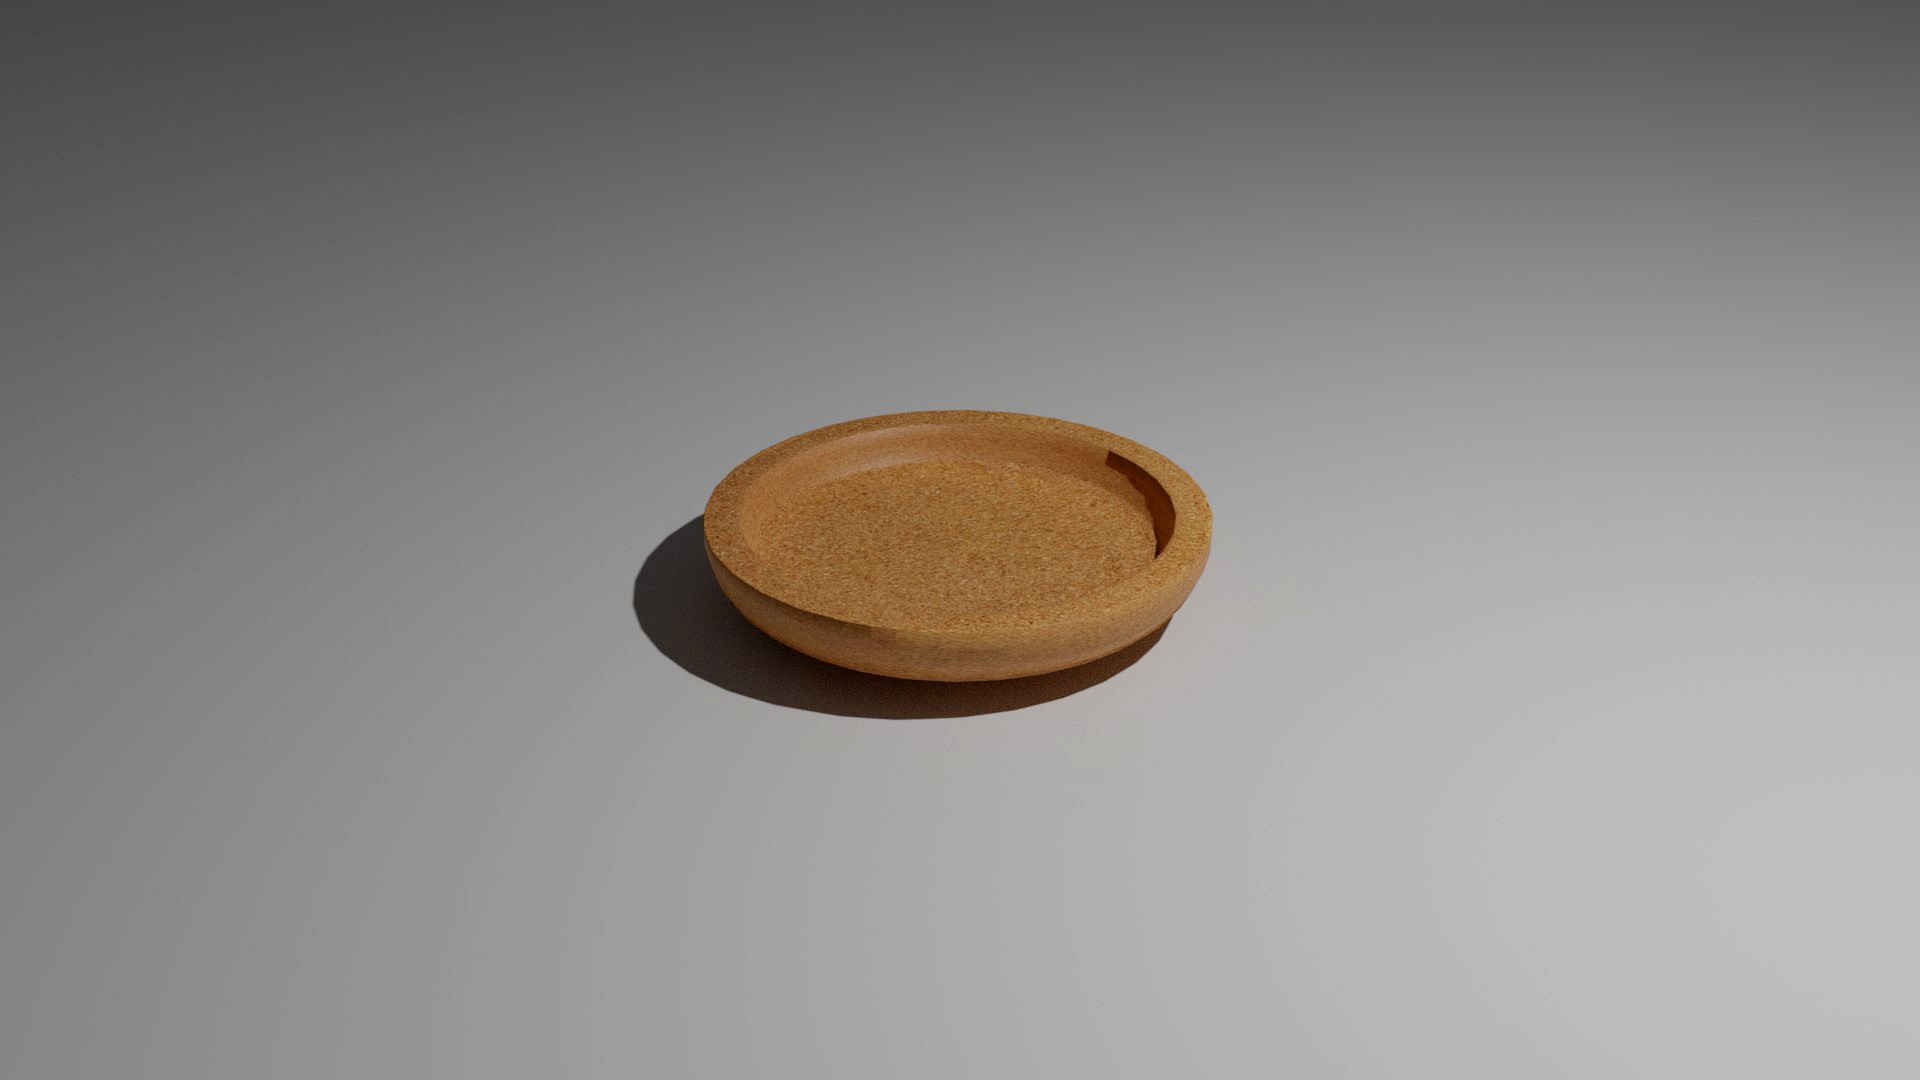 coaster made from cork